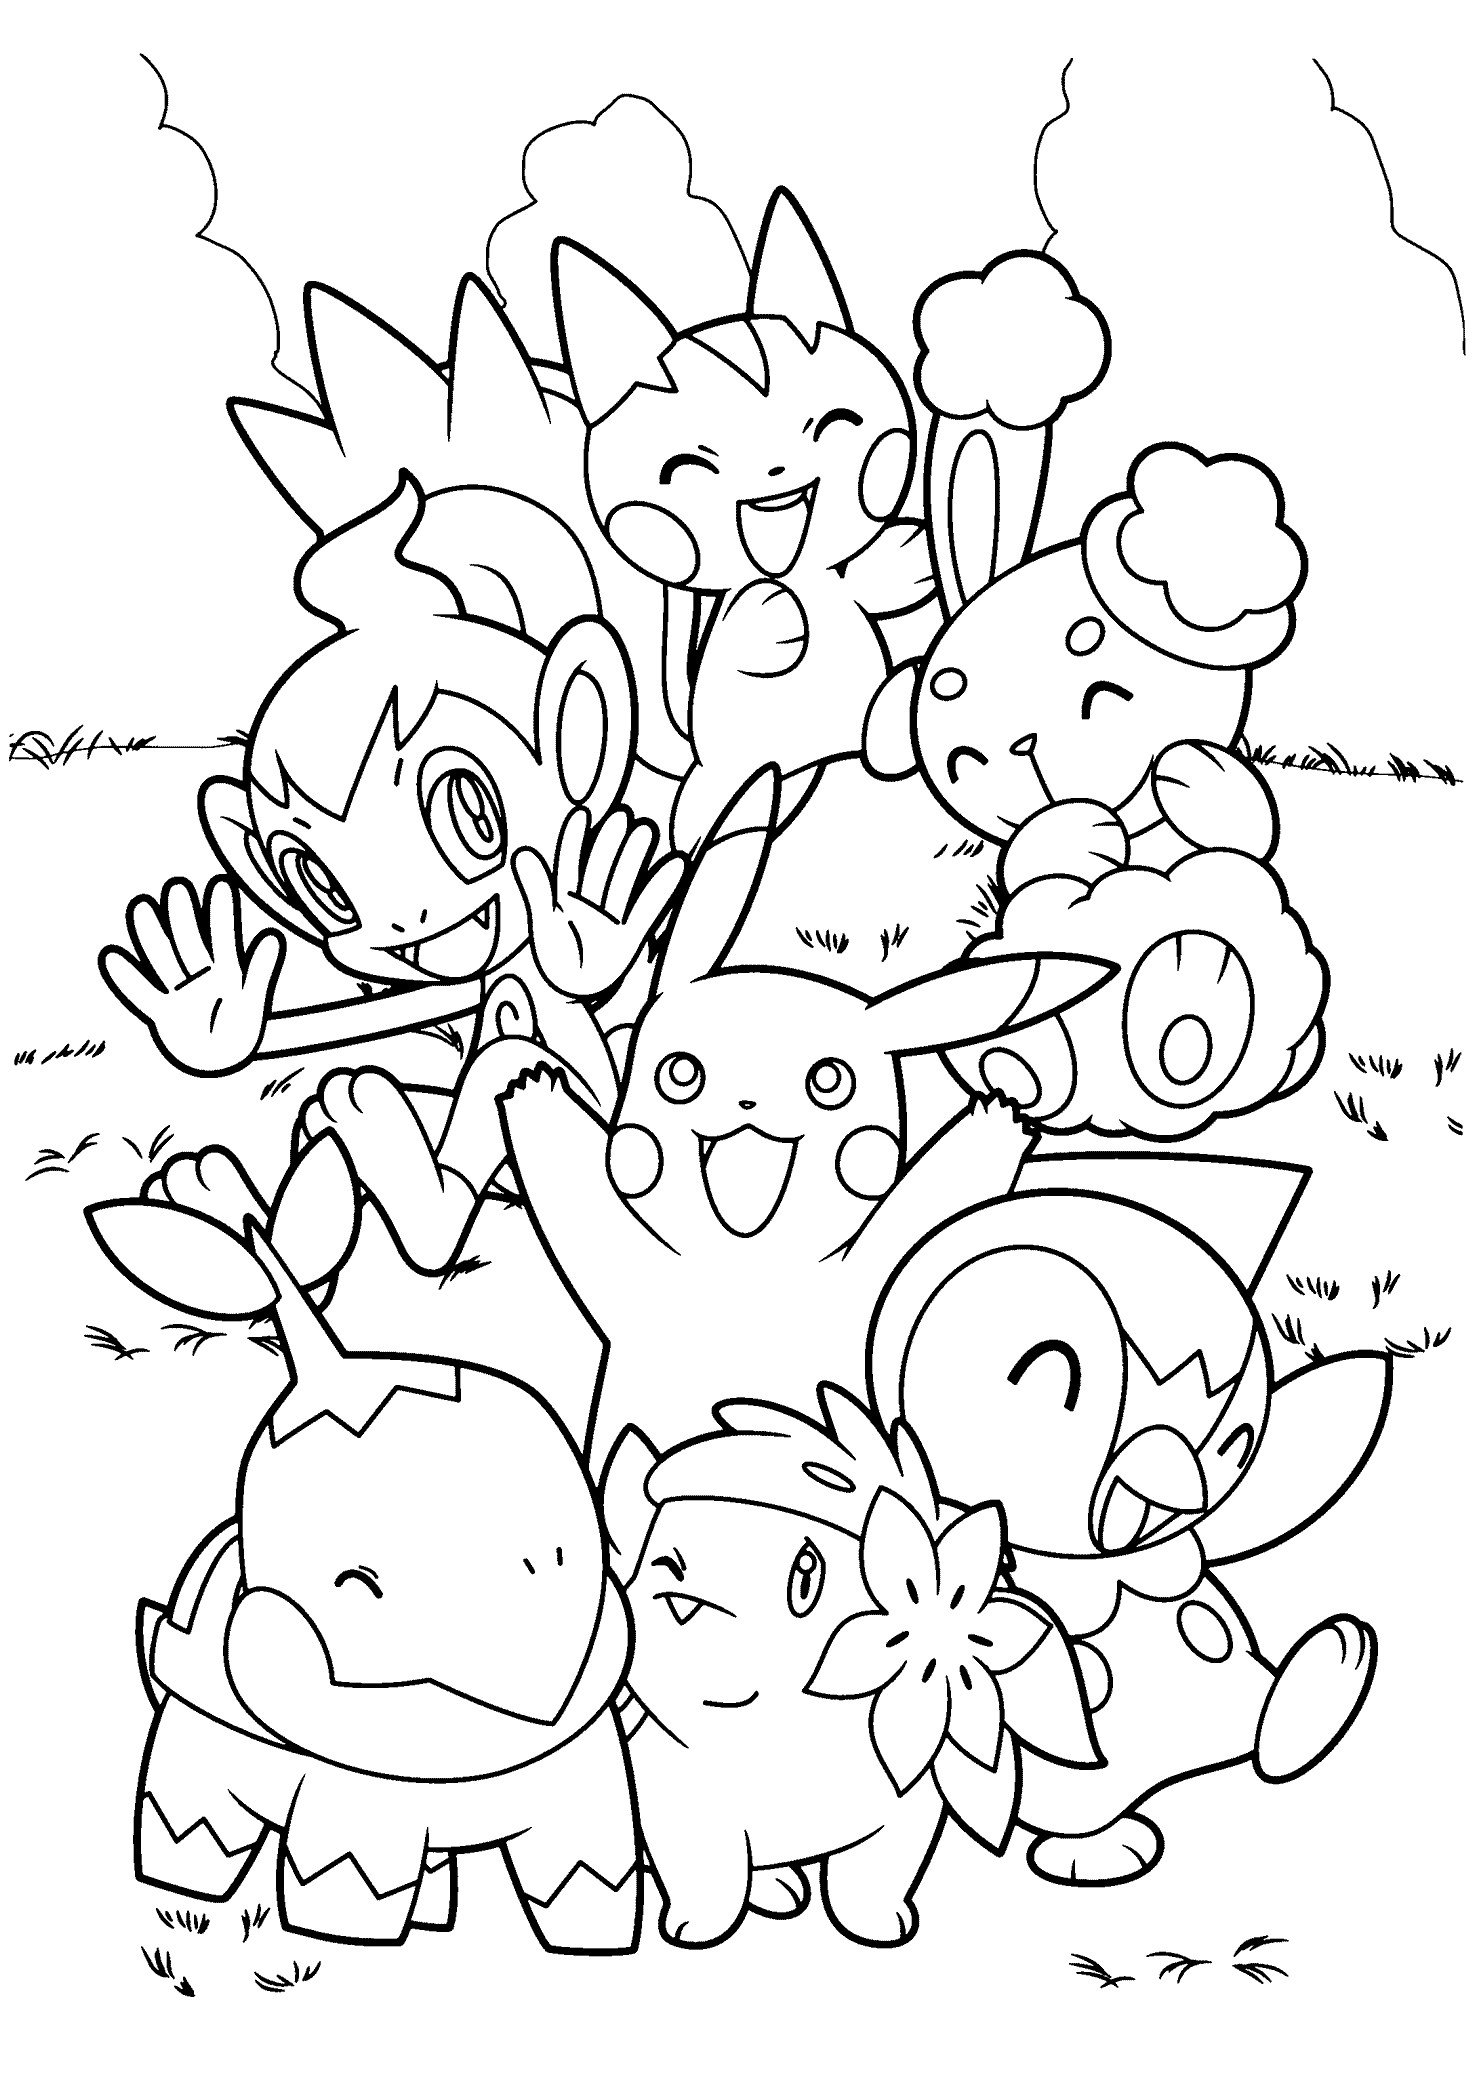 Pokemon Coloring Pages for Adults Wallpaper